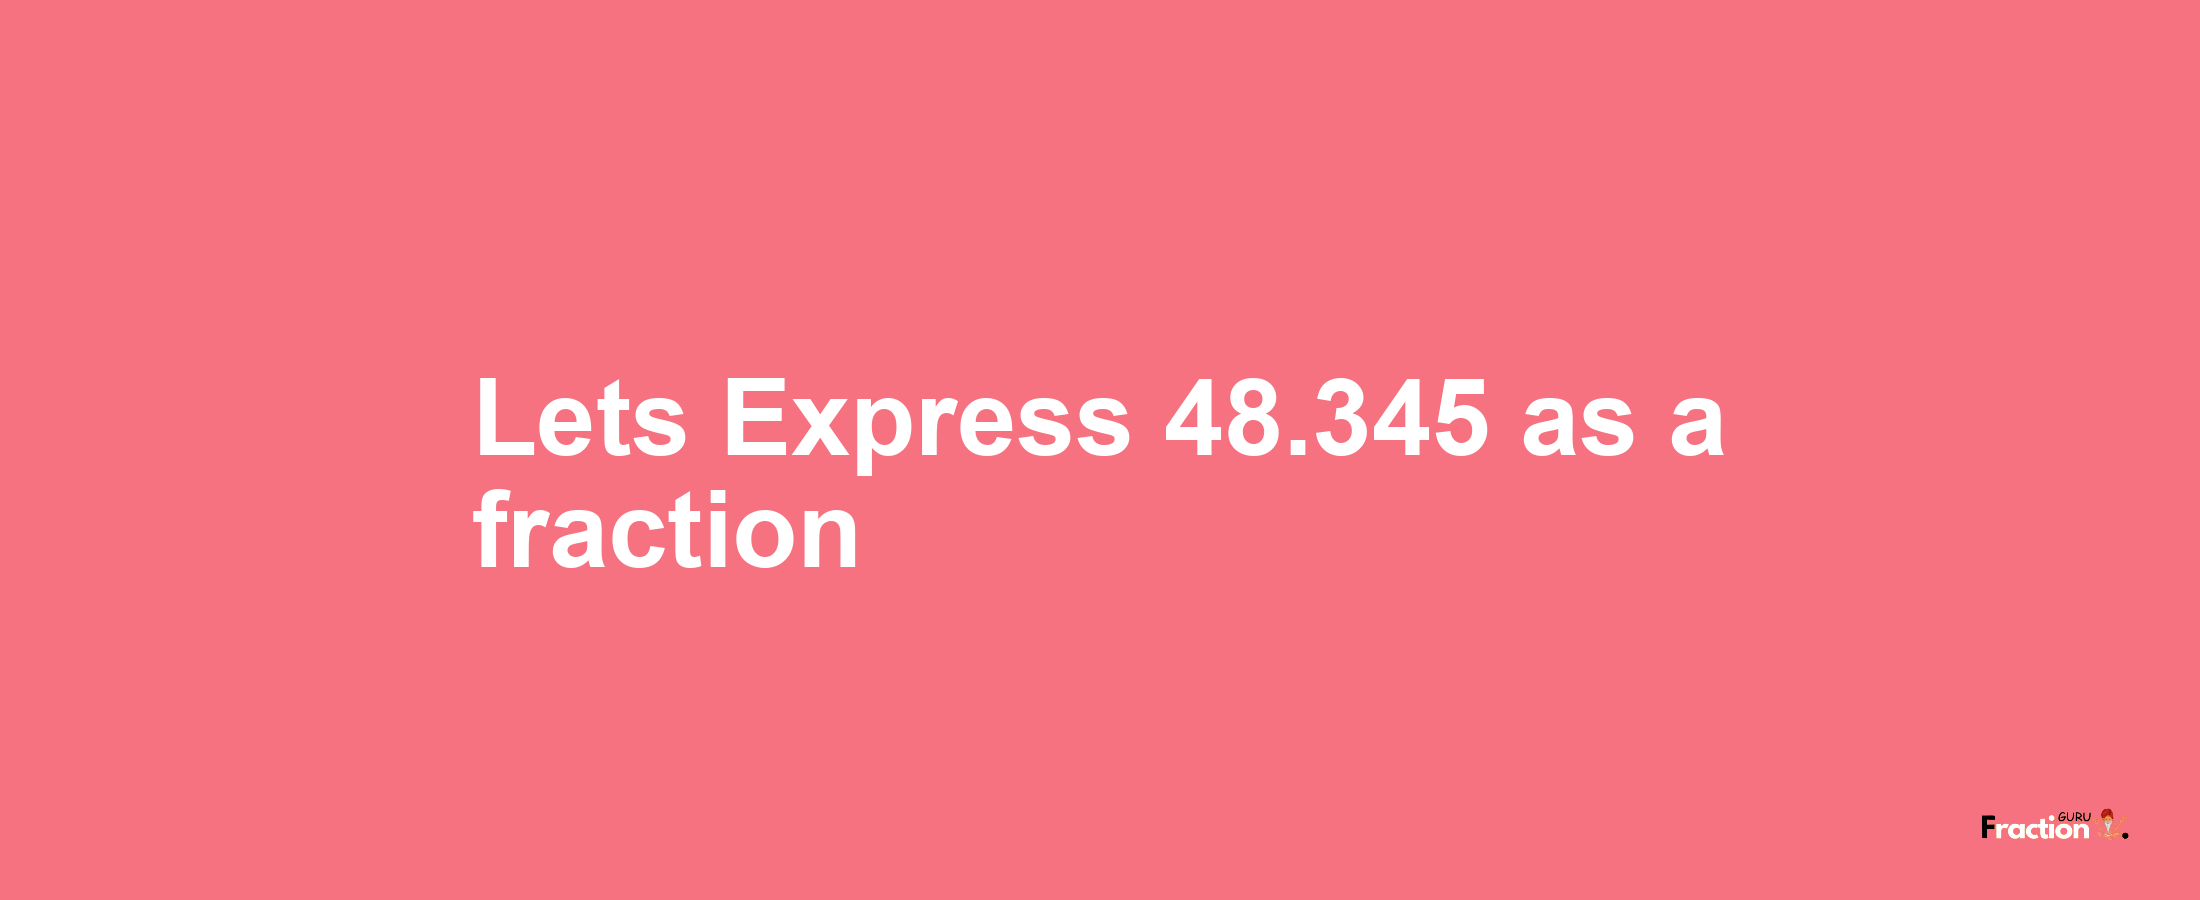 Lets Express 48.345 as afraction